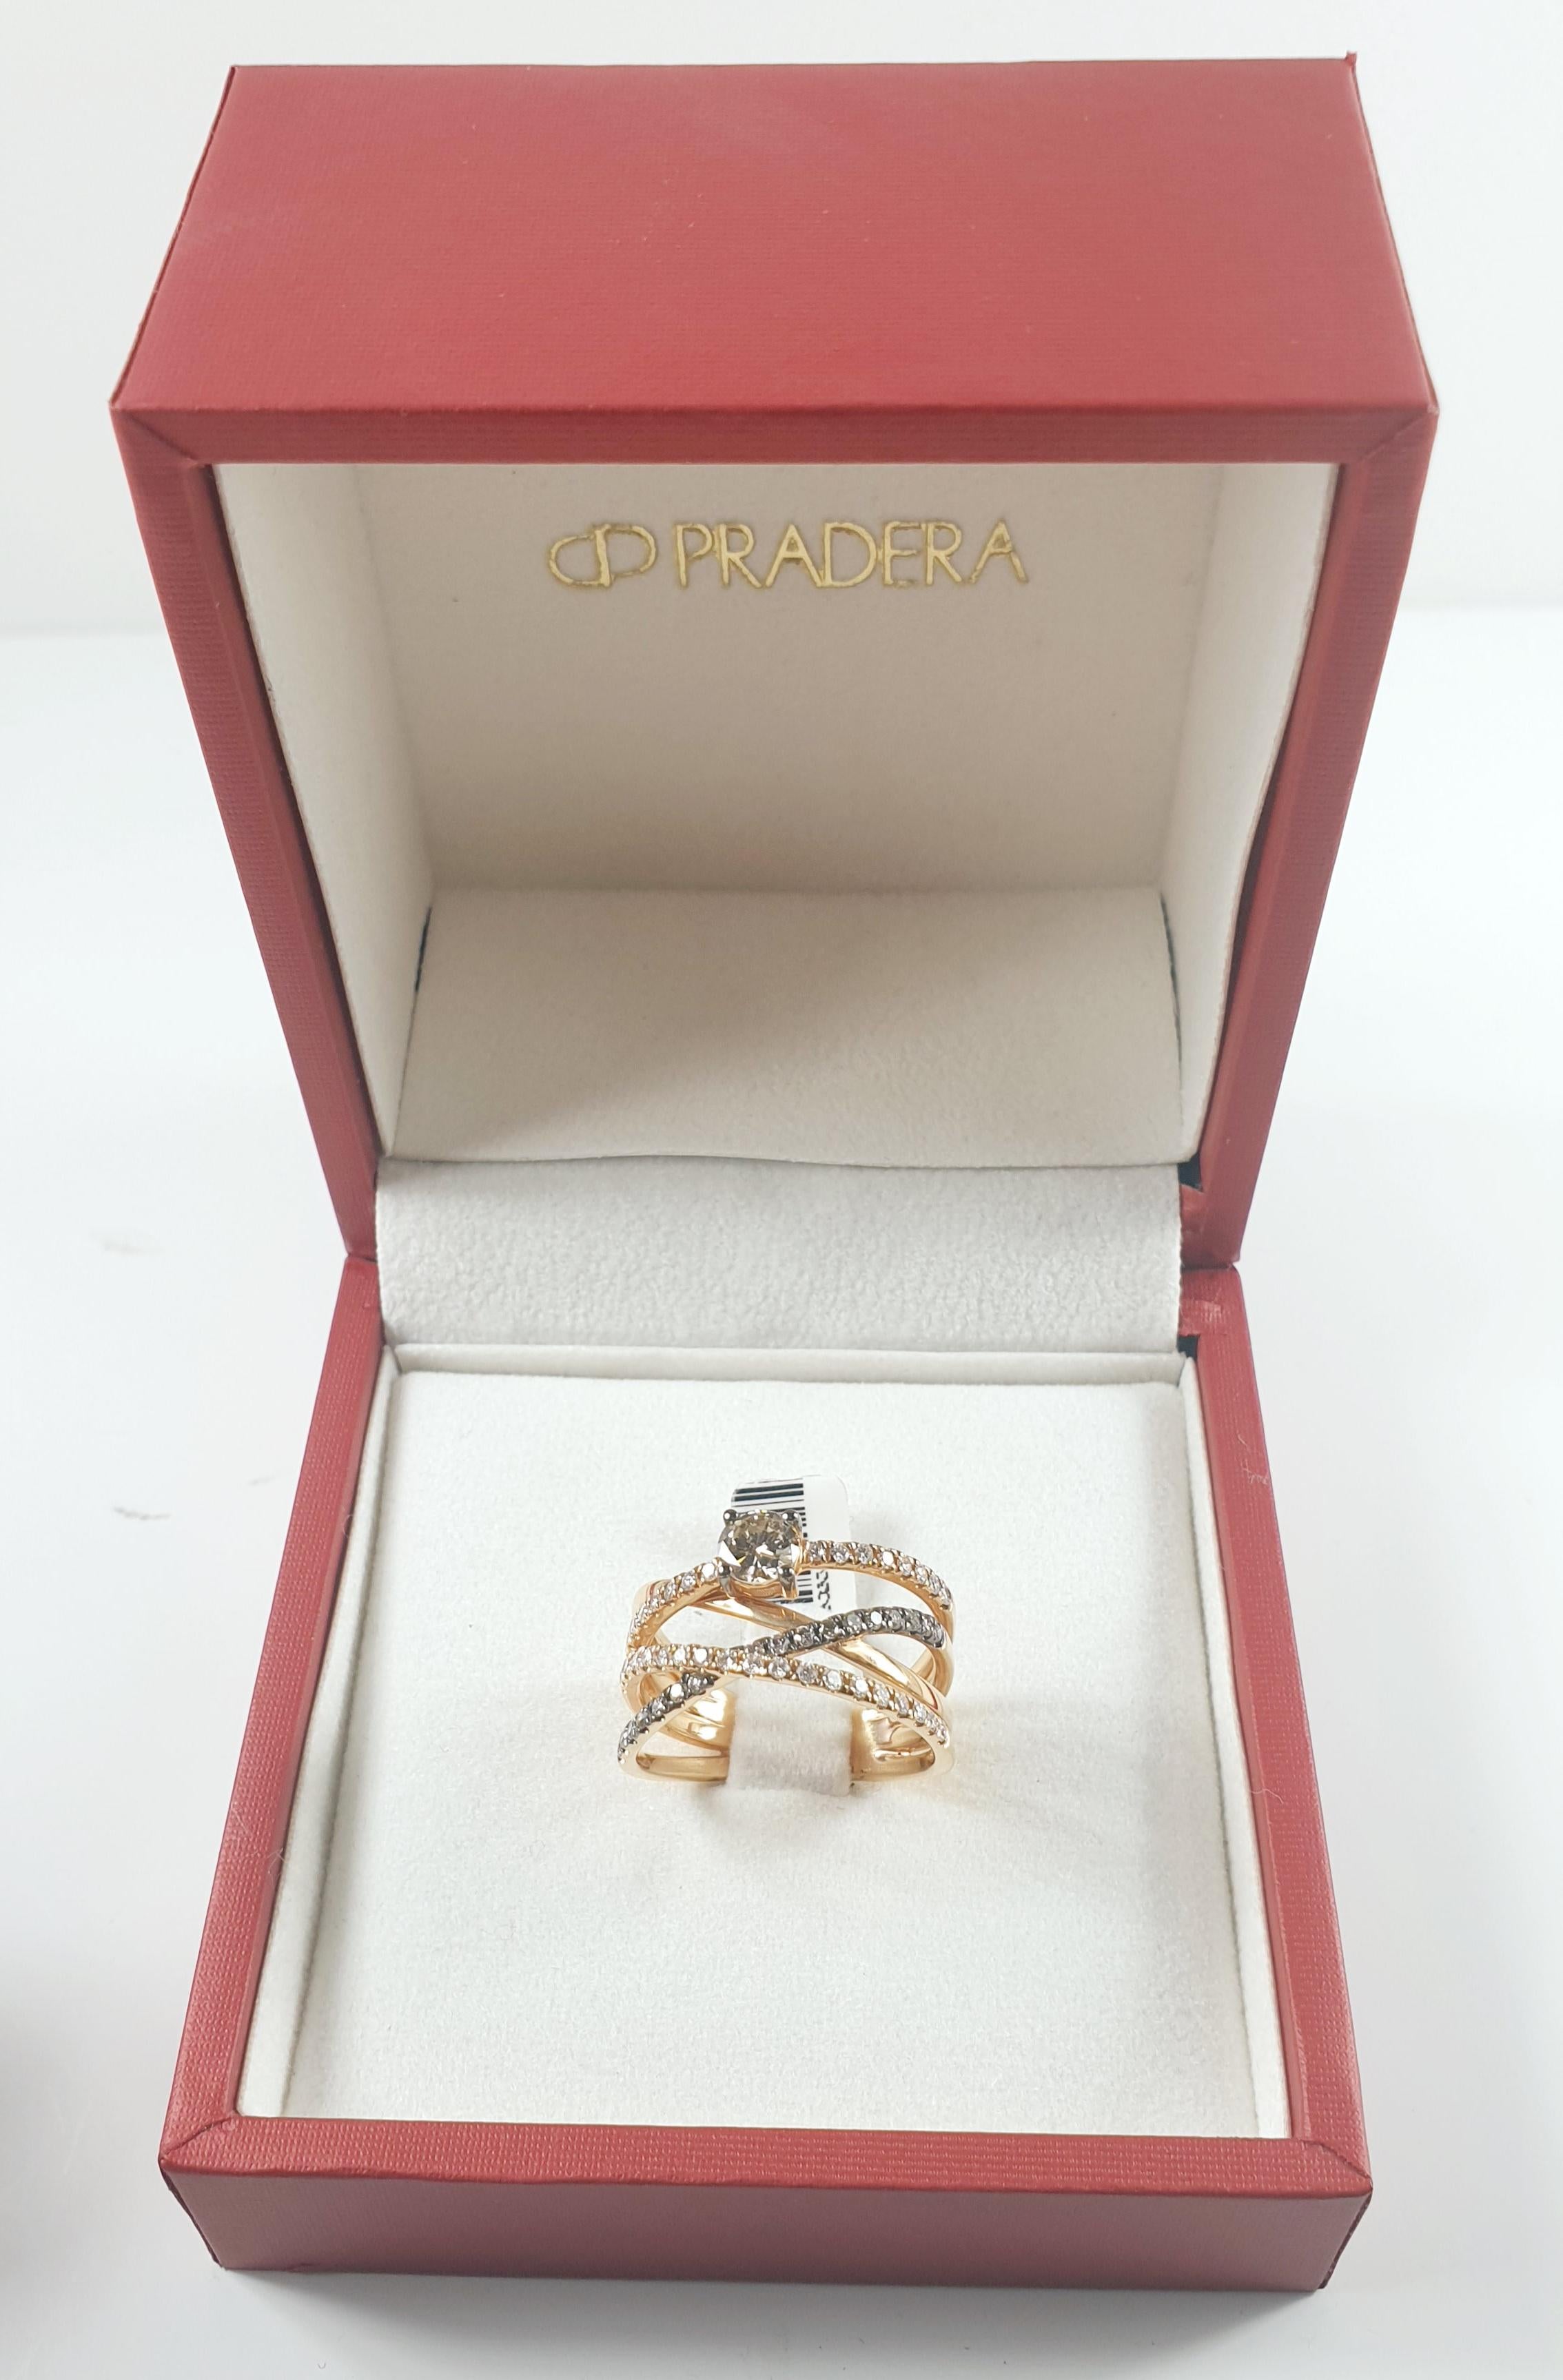 Pradera Solitaire Ring with Center Brown Diamond and 18 Karat Gold For Sale 1